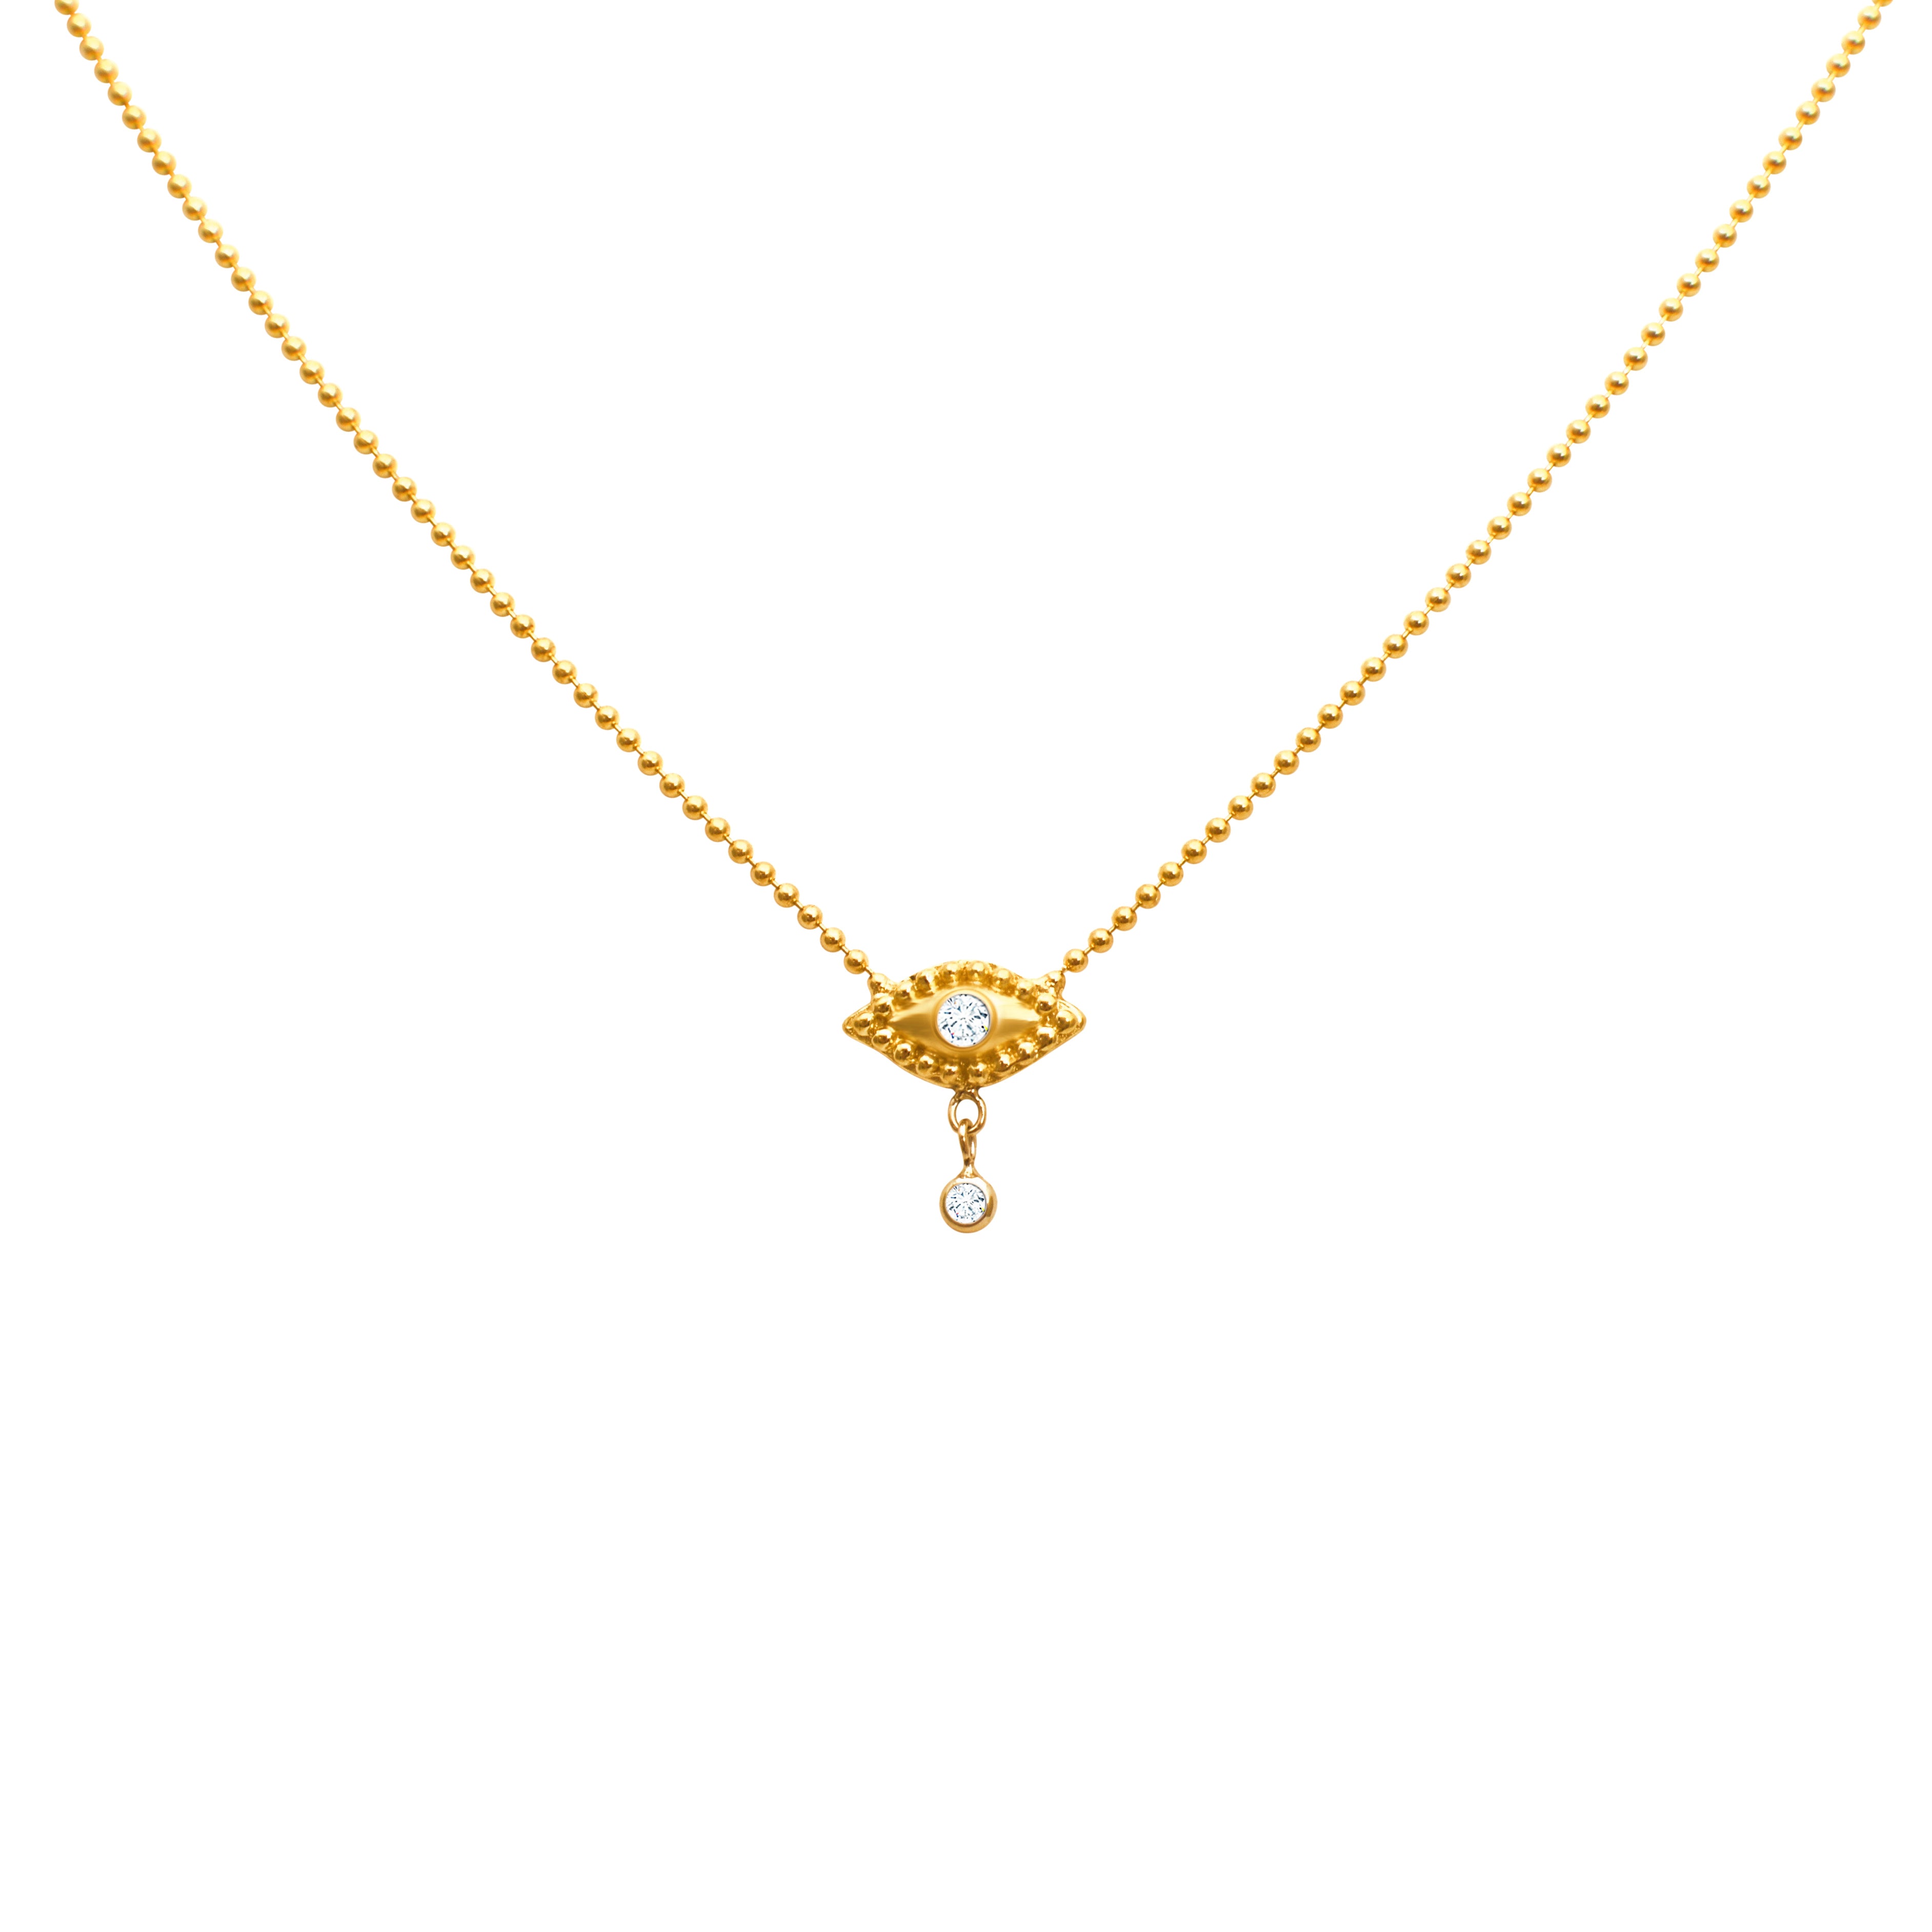 EVIL EYE NECKLACE WITH DANGLING DIAMOND IN 18K YELLOW GOLD